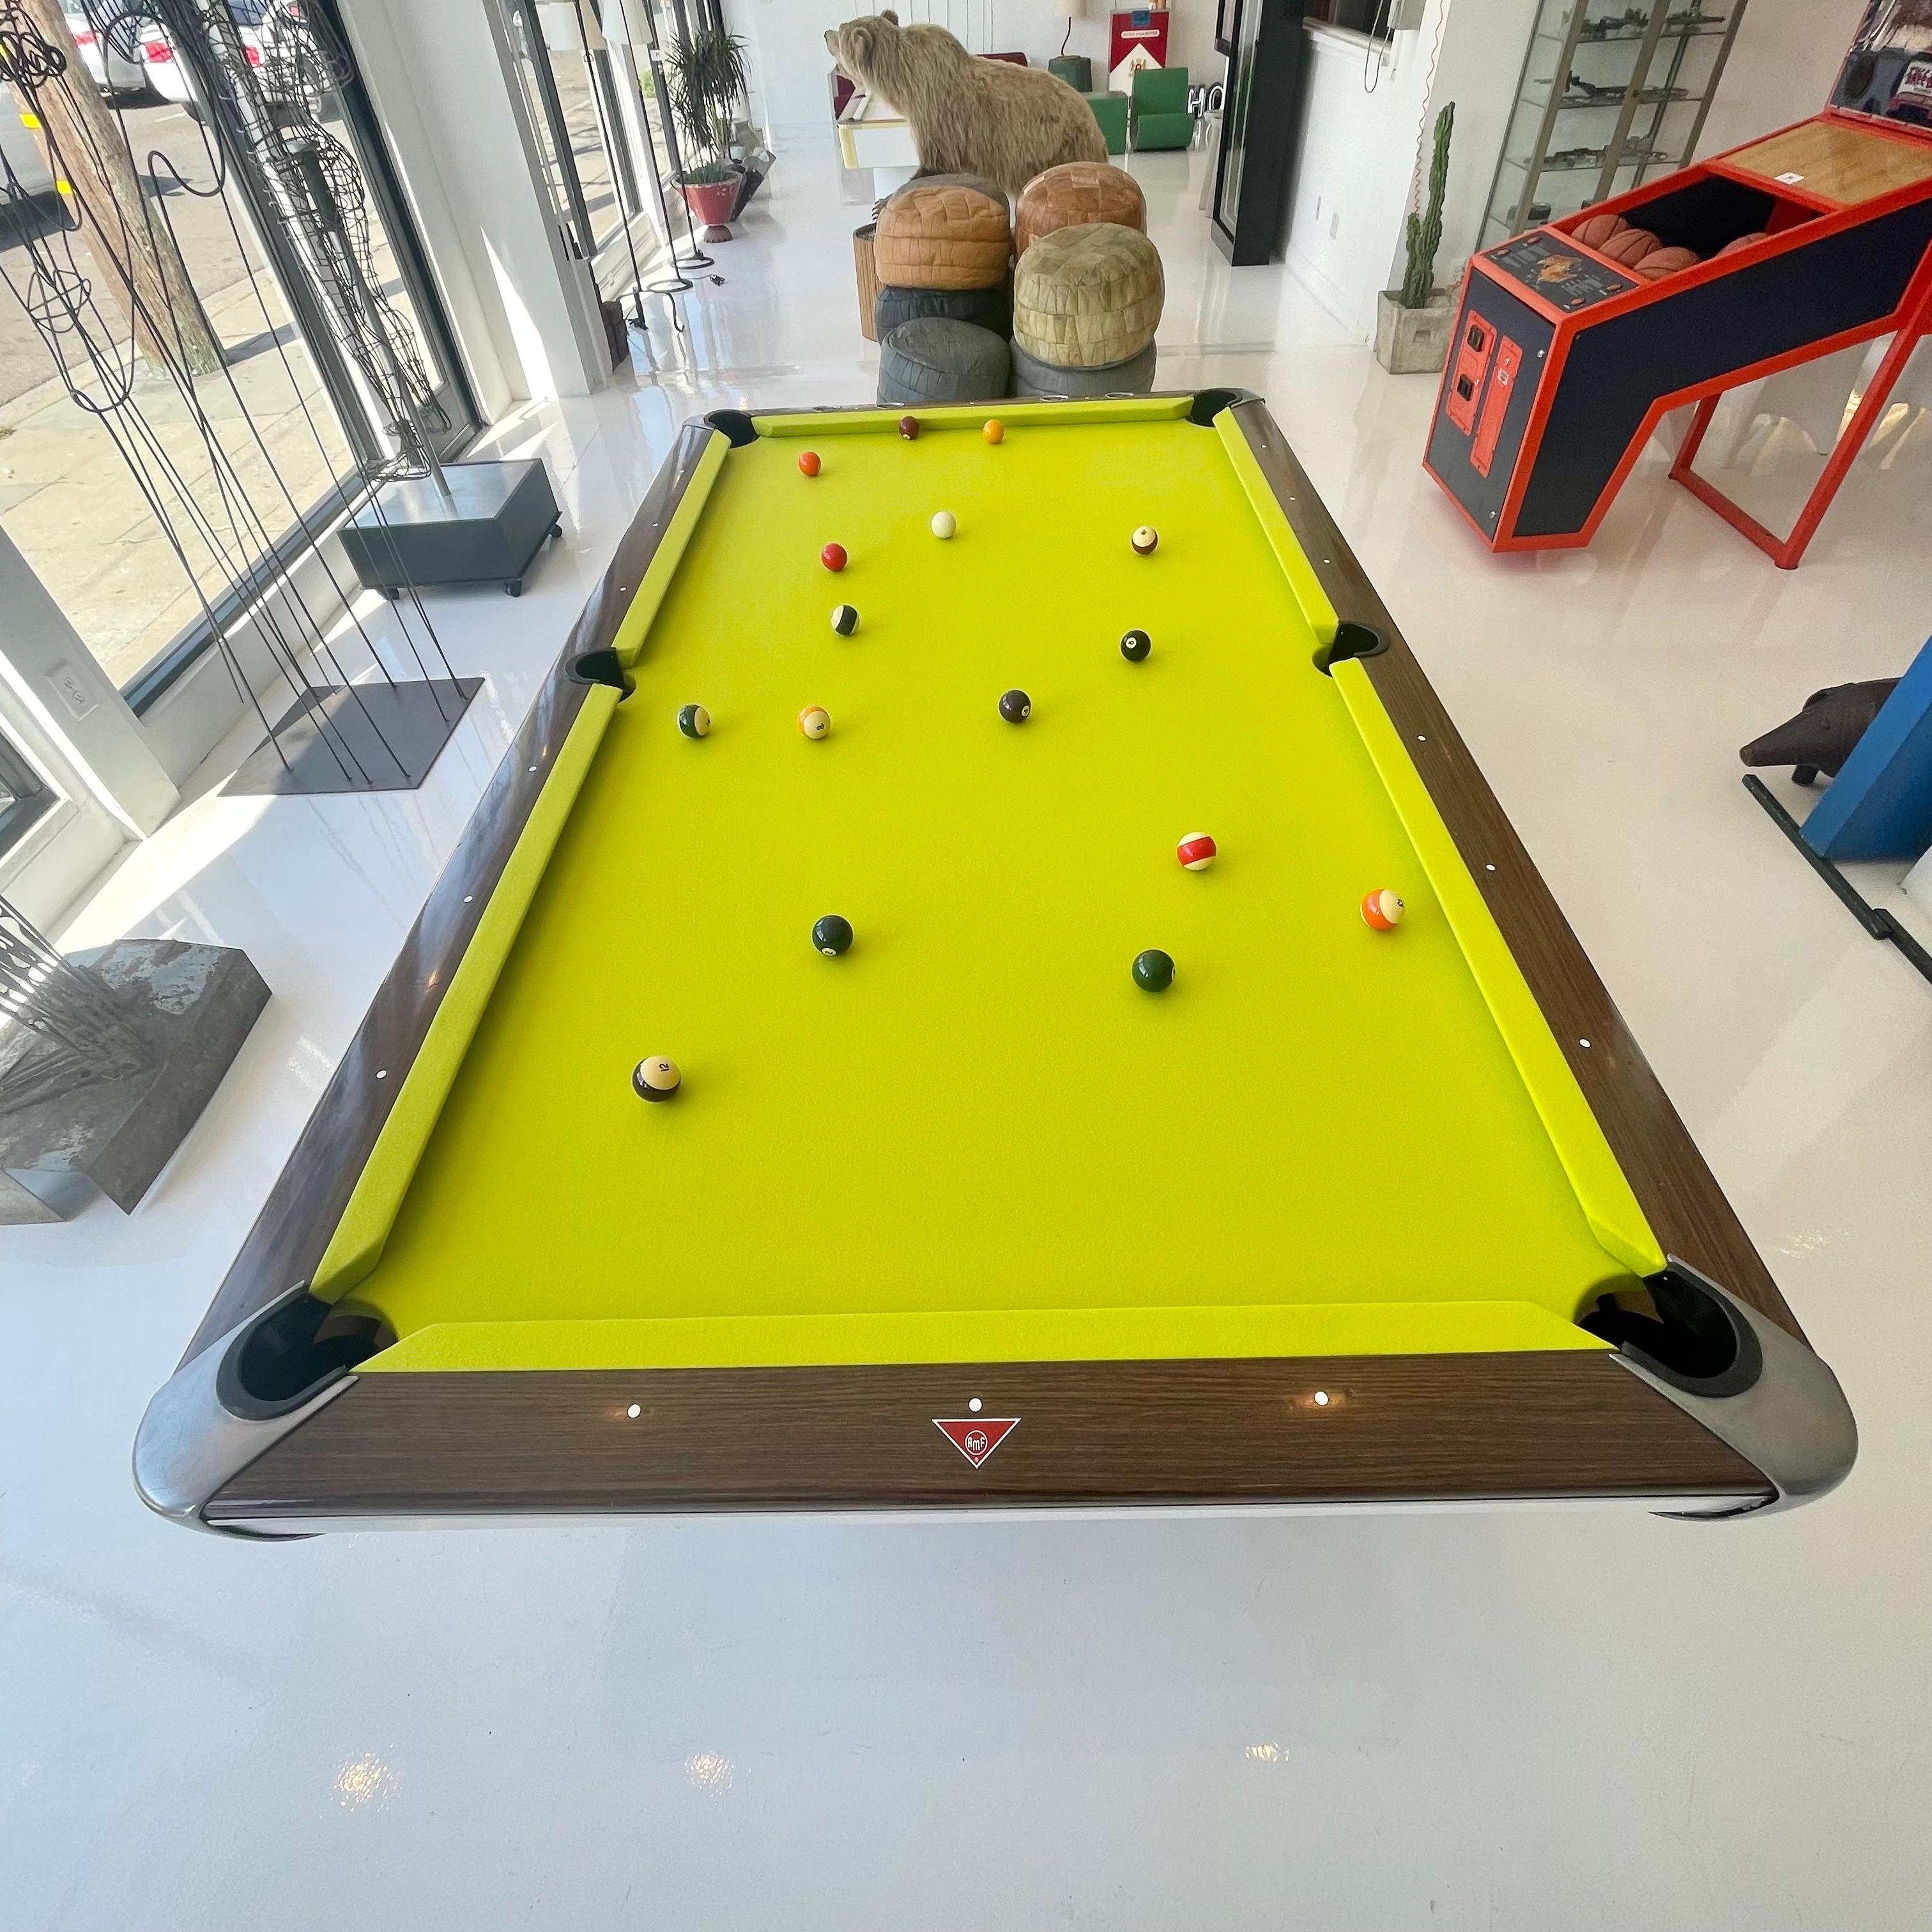 amf pool table for sale